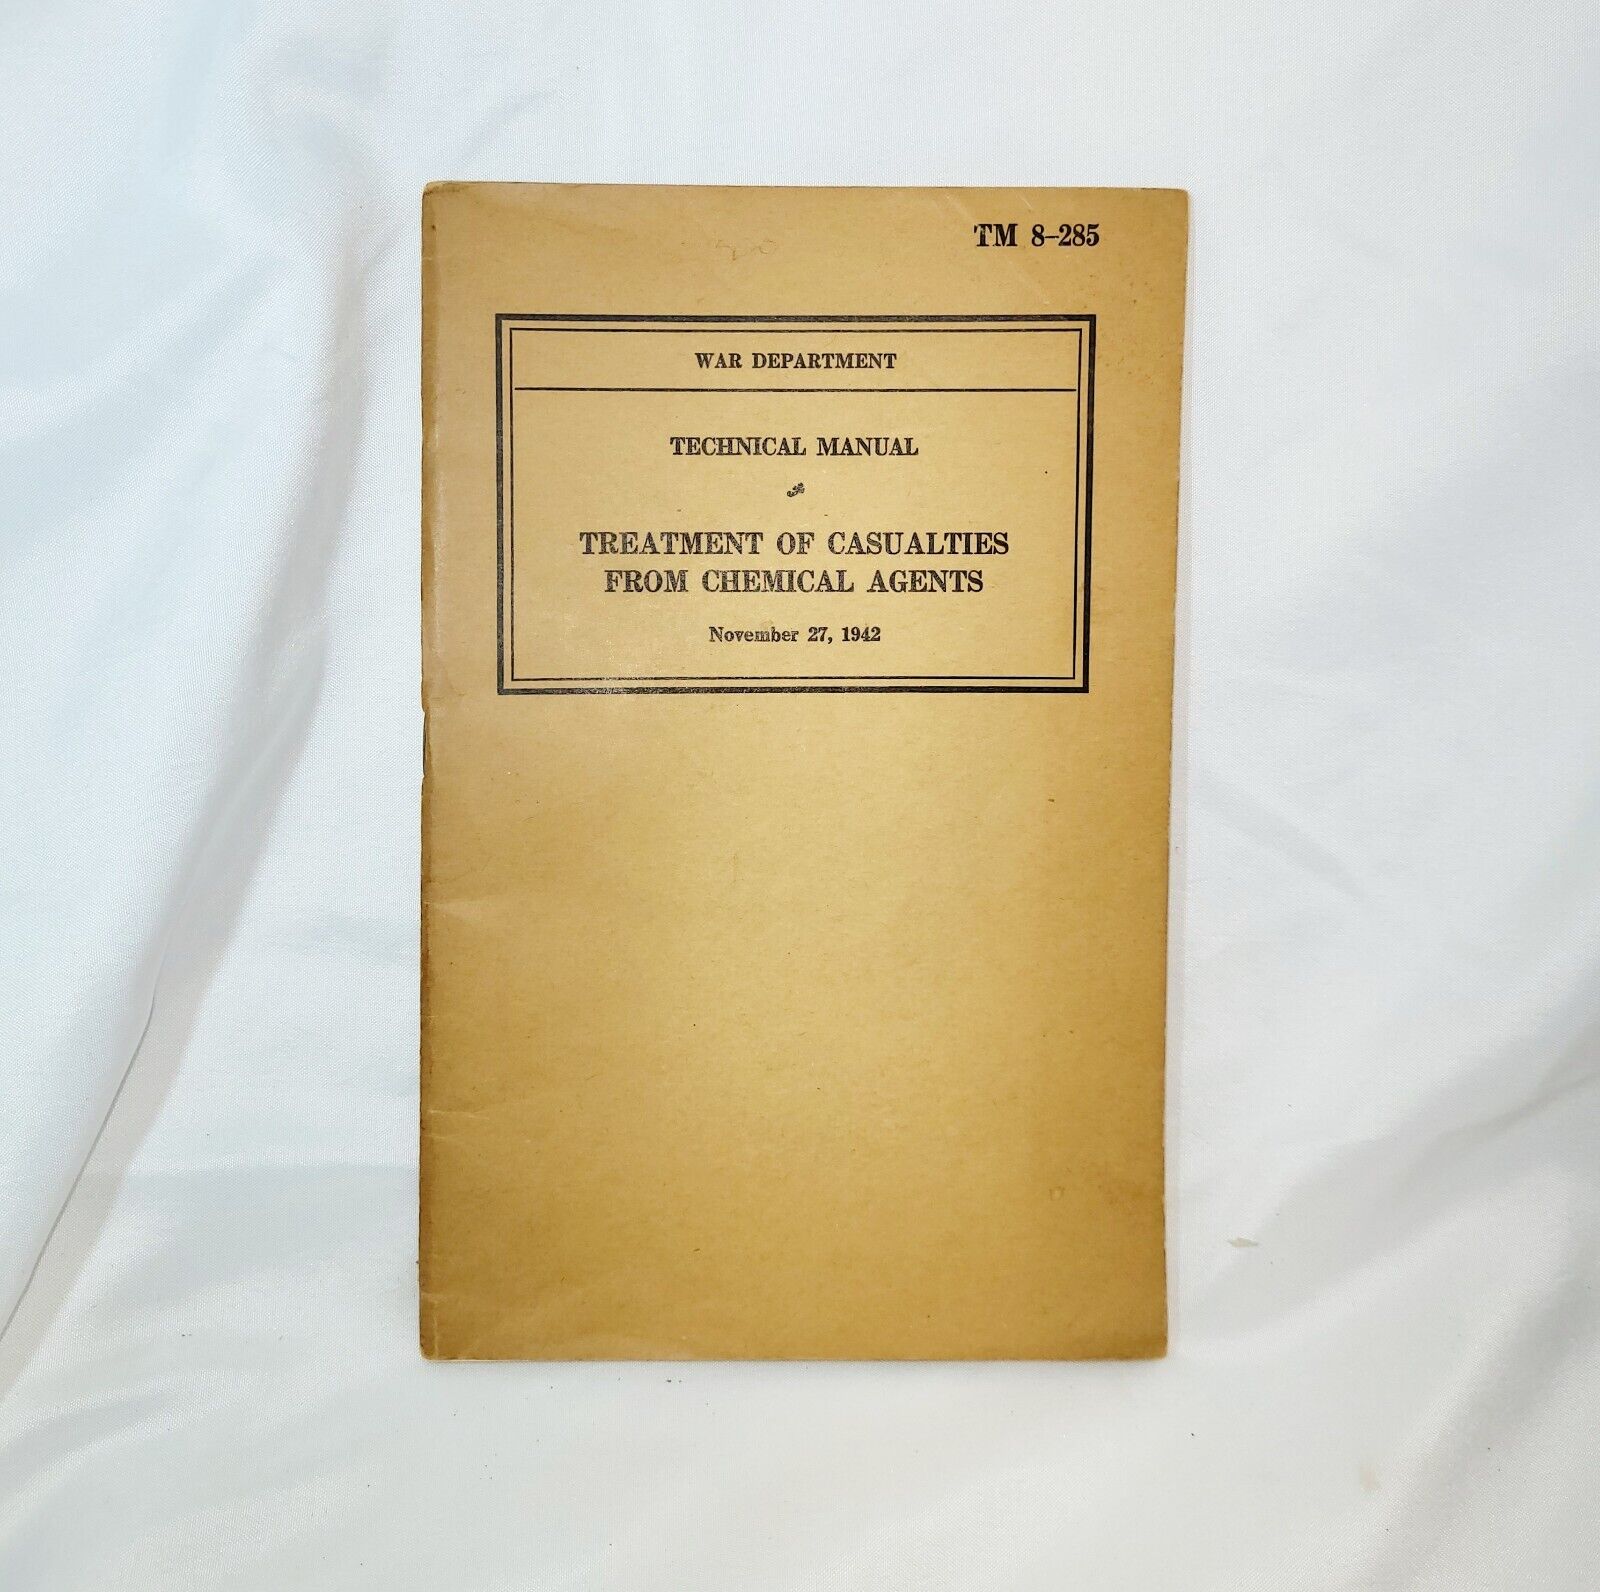 World War 11 Technical Manual Treatment of Casualties from Chemical Agents